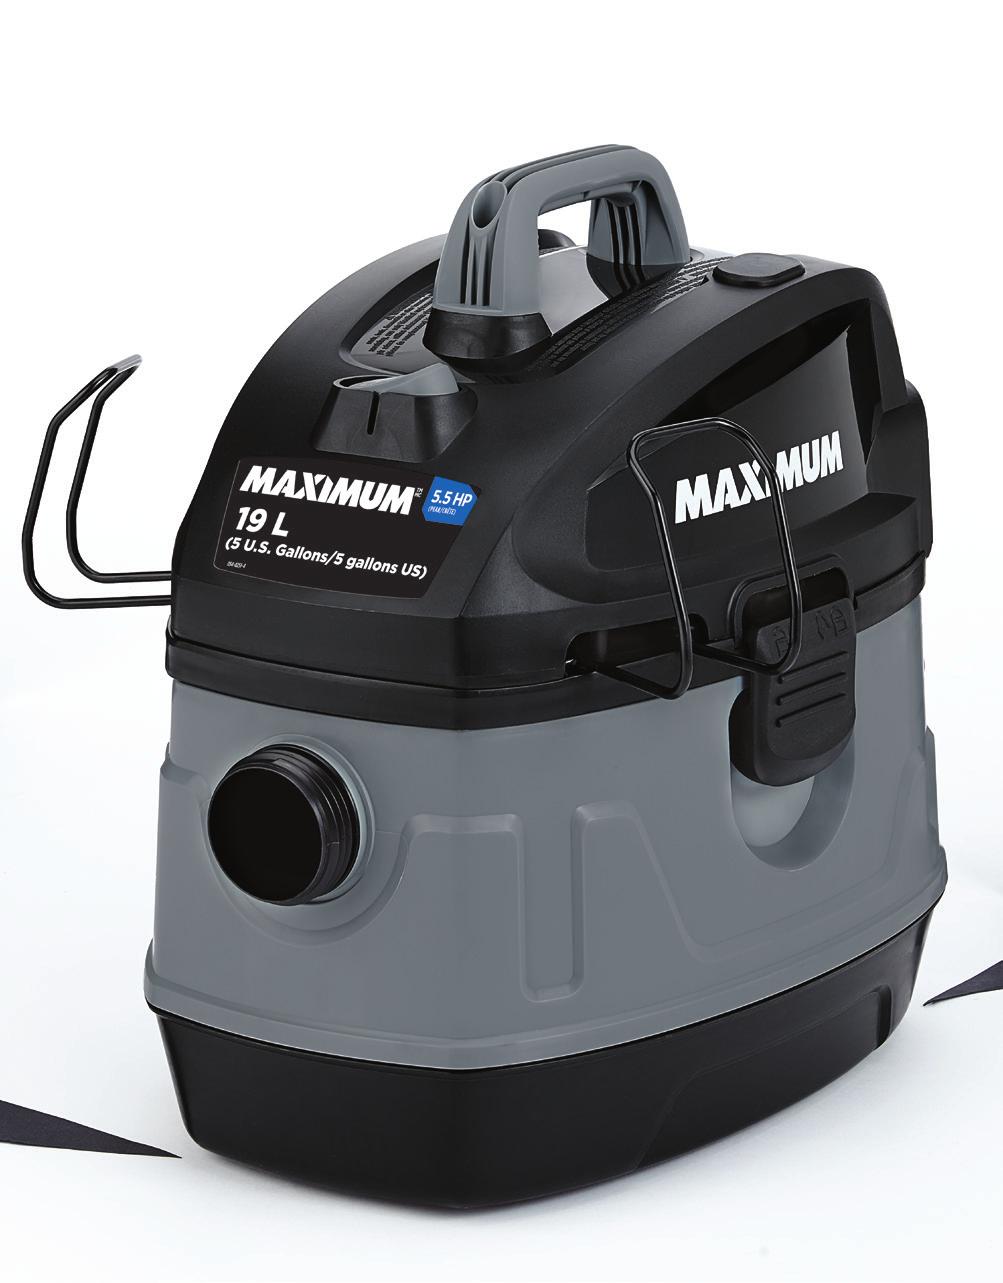 TM 19 L (5 U.S. Gallons) Portable Wet/Dry Vacuum with High Performance Motor Model no.